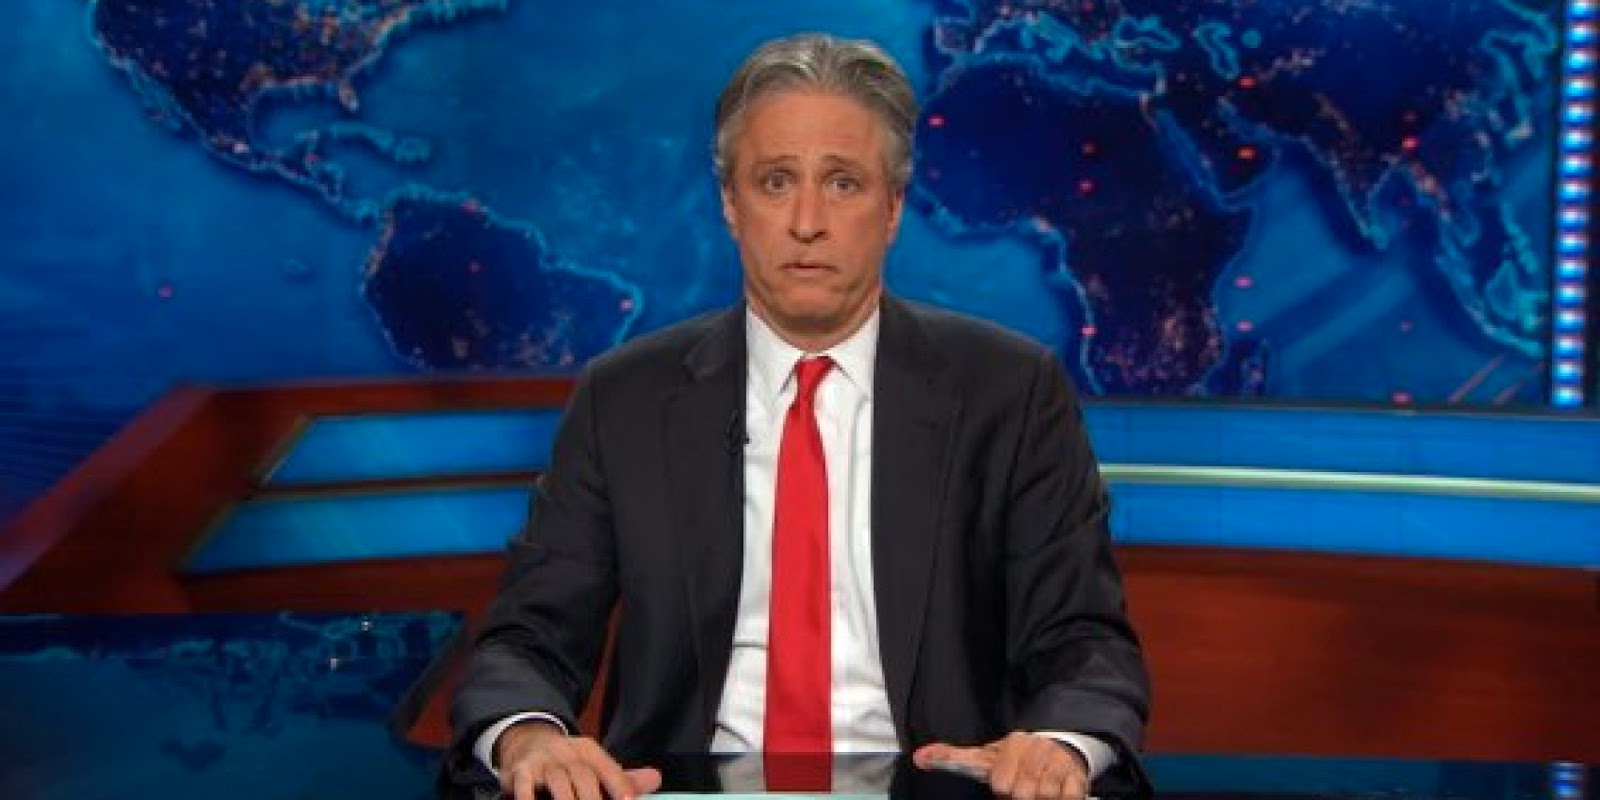 The Flaming Nose LEADERSHIP LESSONS FROM JON STEWART AND "THE DAILY SHOW"